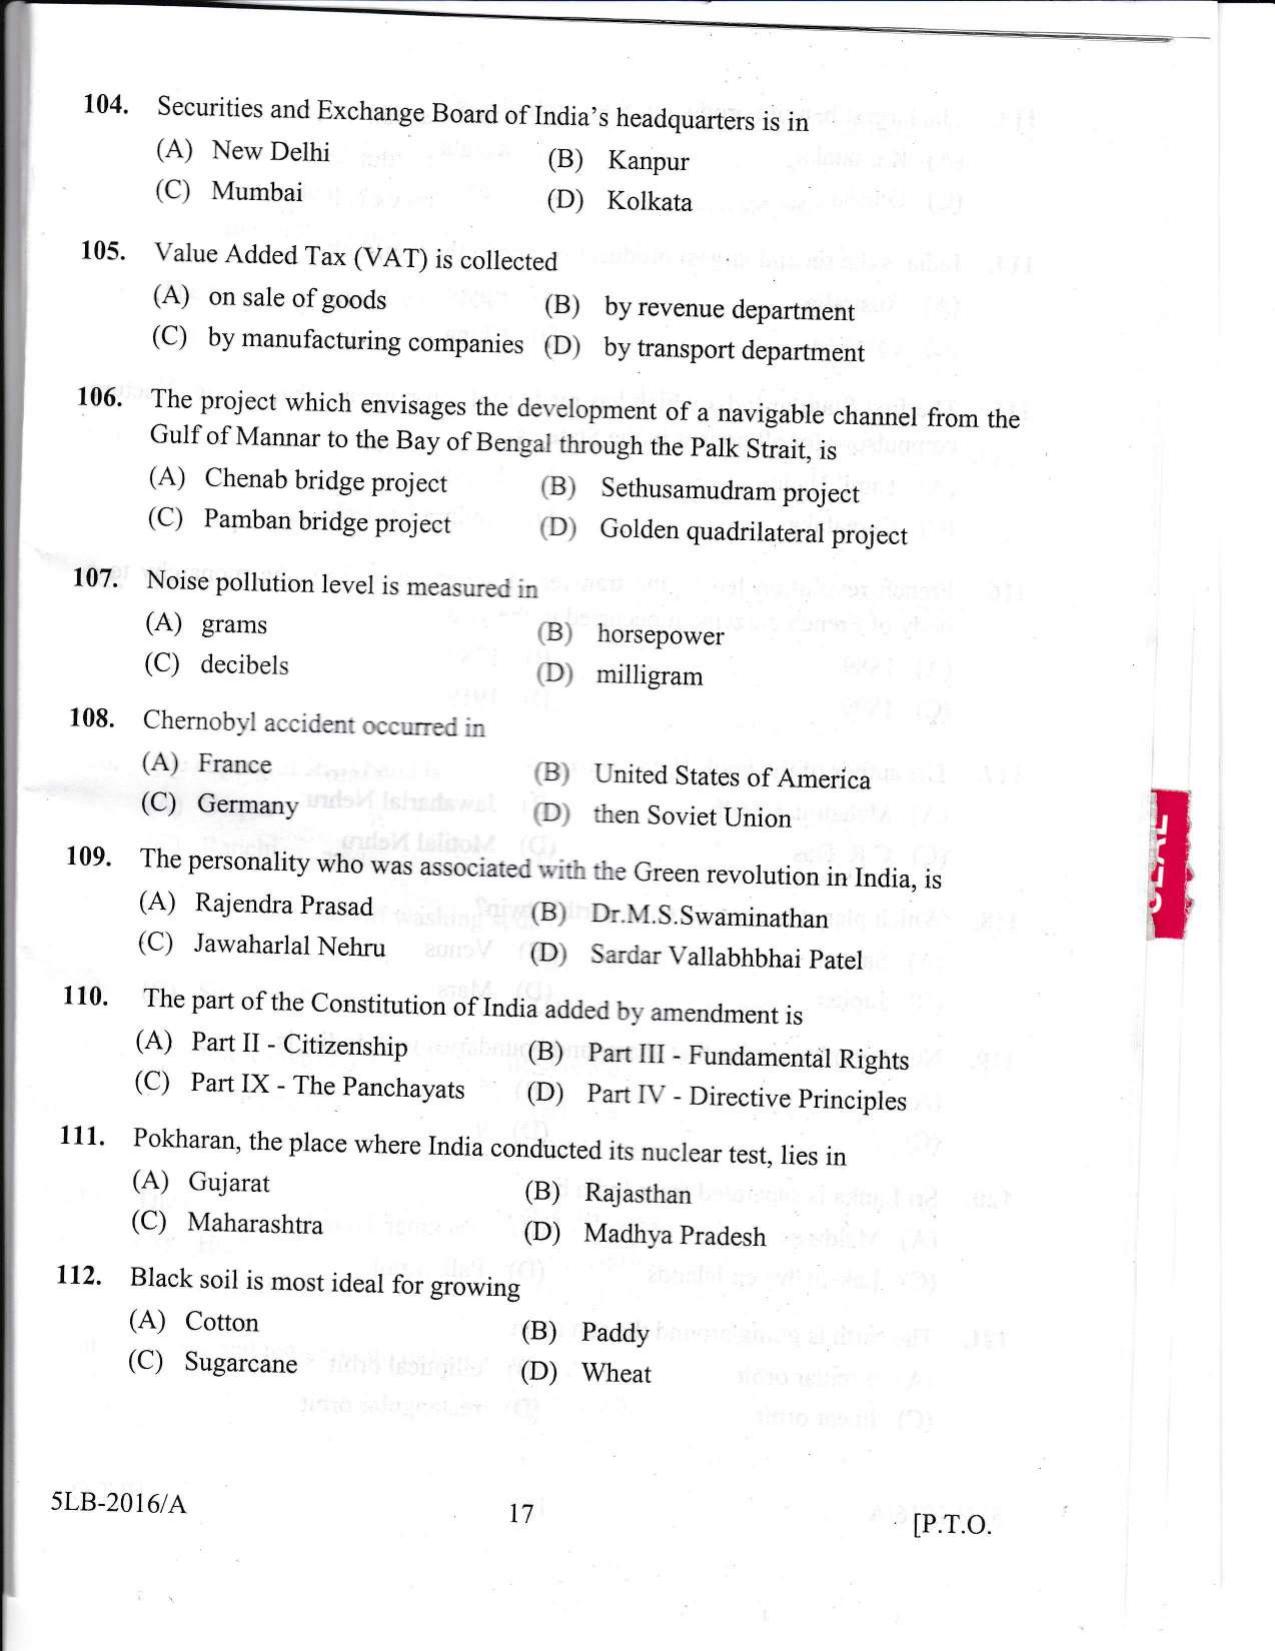 KLEE 5 Year LLB Exam 2016 Question Paper - Page 17